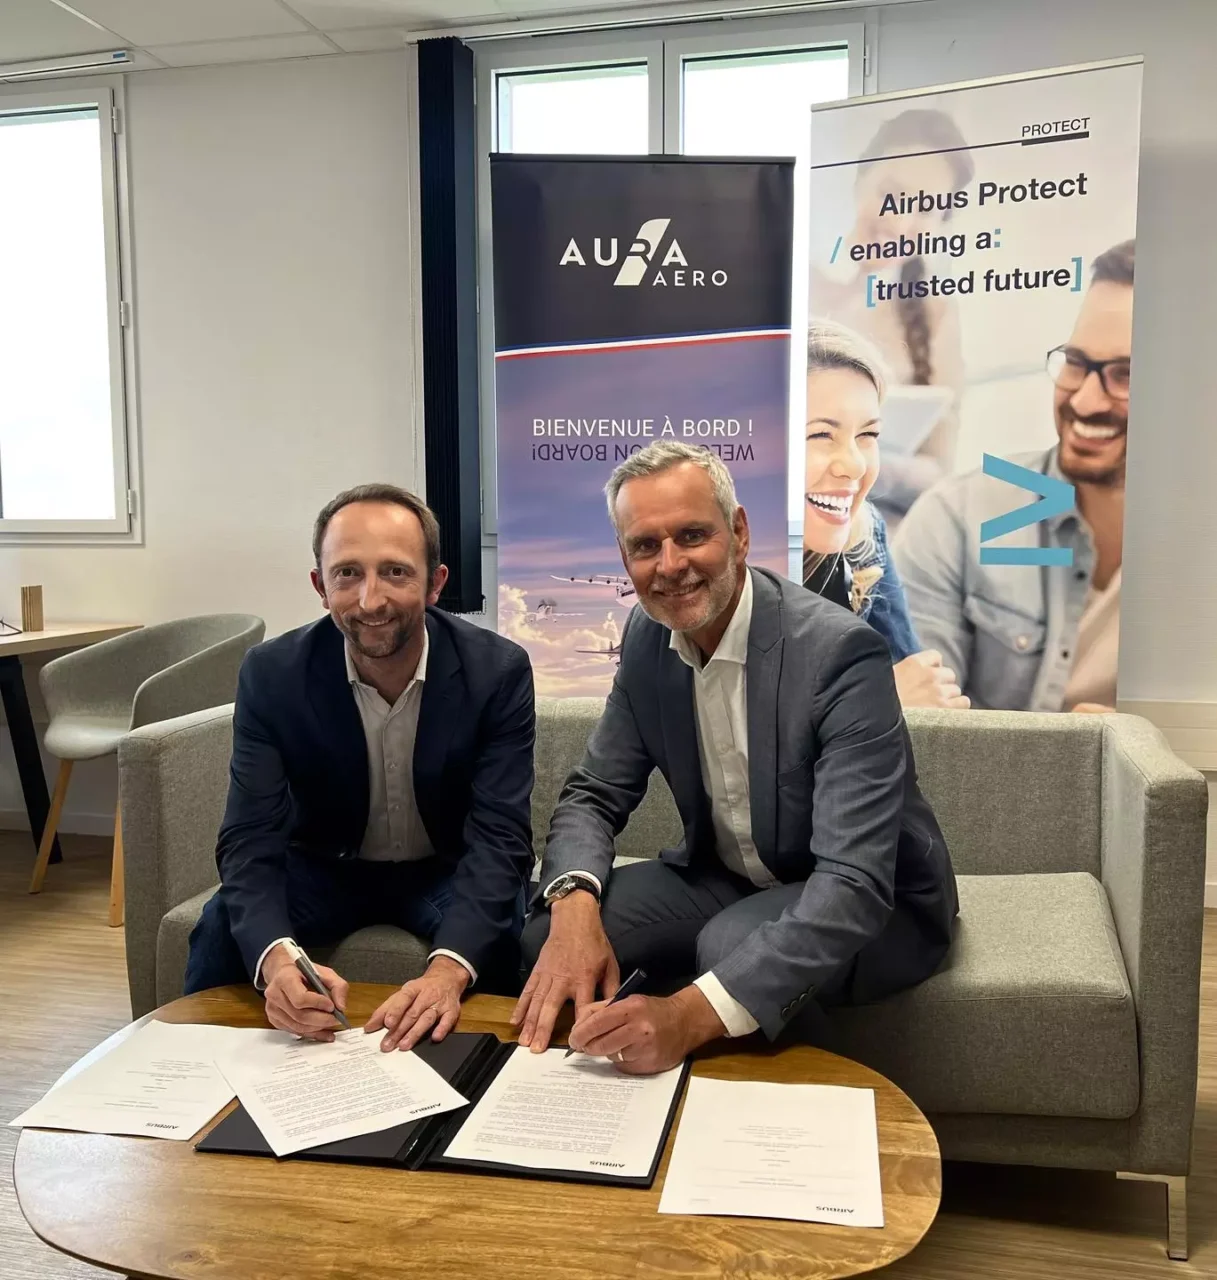 Jeremy Caussade, CEO of AURA AERO, and Thierry Racaud, CEO of Airbus Protect, sign a cooperation agreement in view of the certification of ERA.